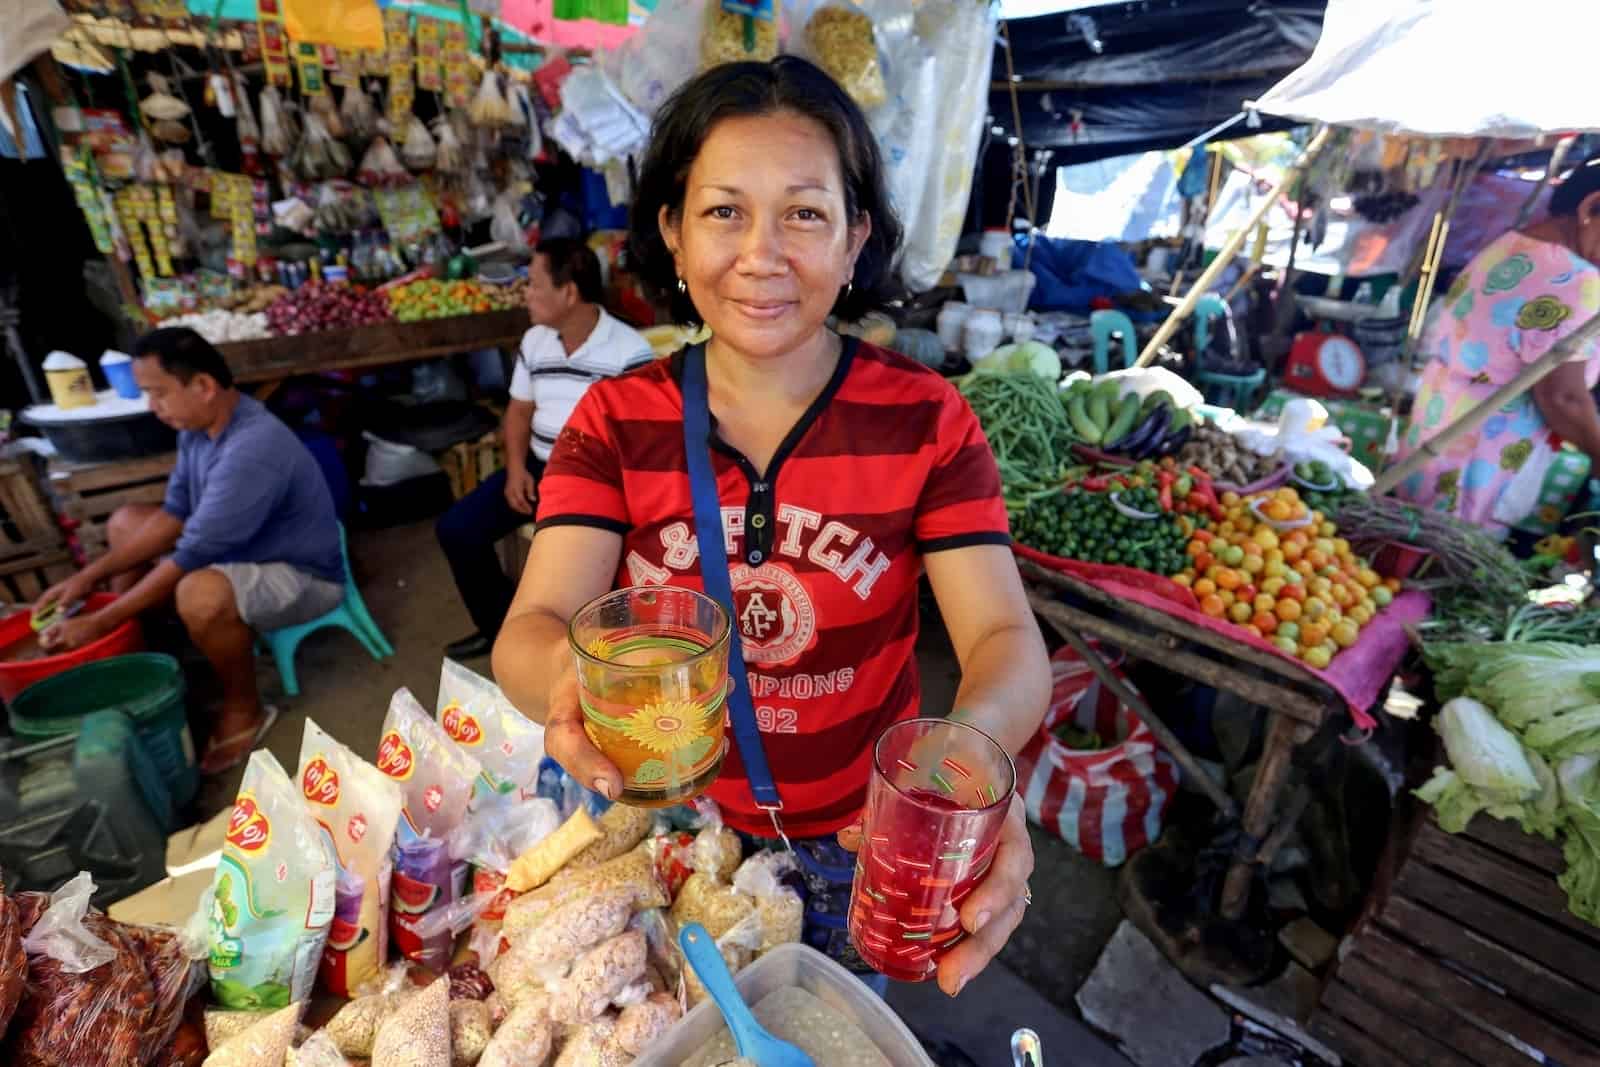 A woman wearing a red shirt holds out two drinks, standing in a grocery stall.